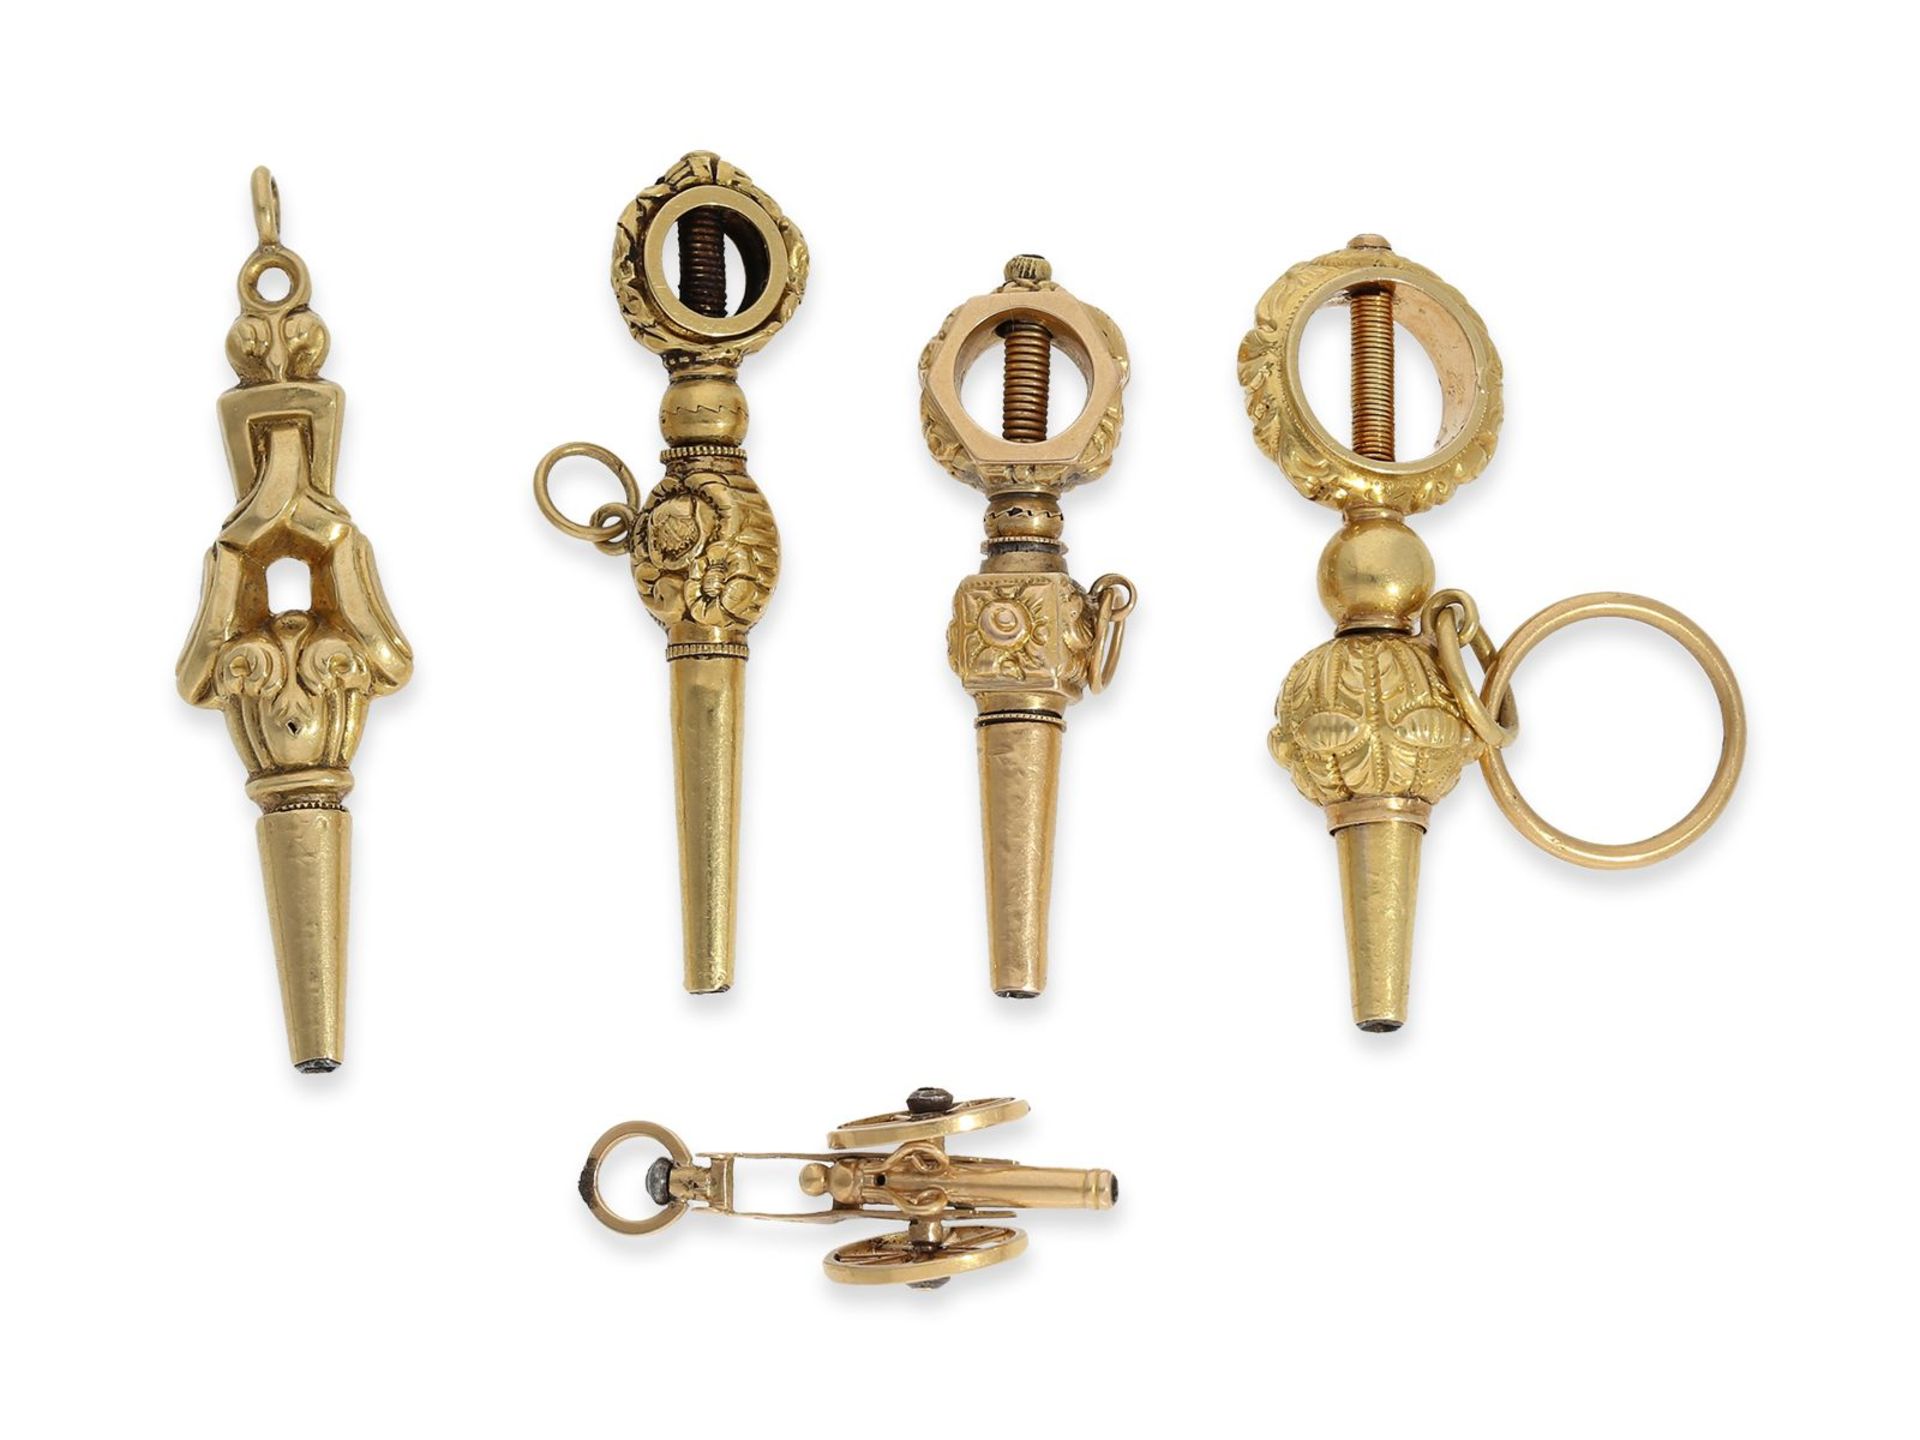 Watch keys: 5 rare gold verge watch keys, 18th century and early 19th century - Image 2 of 2